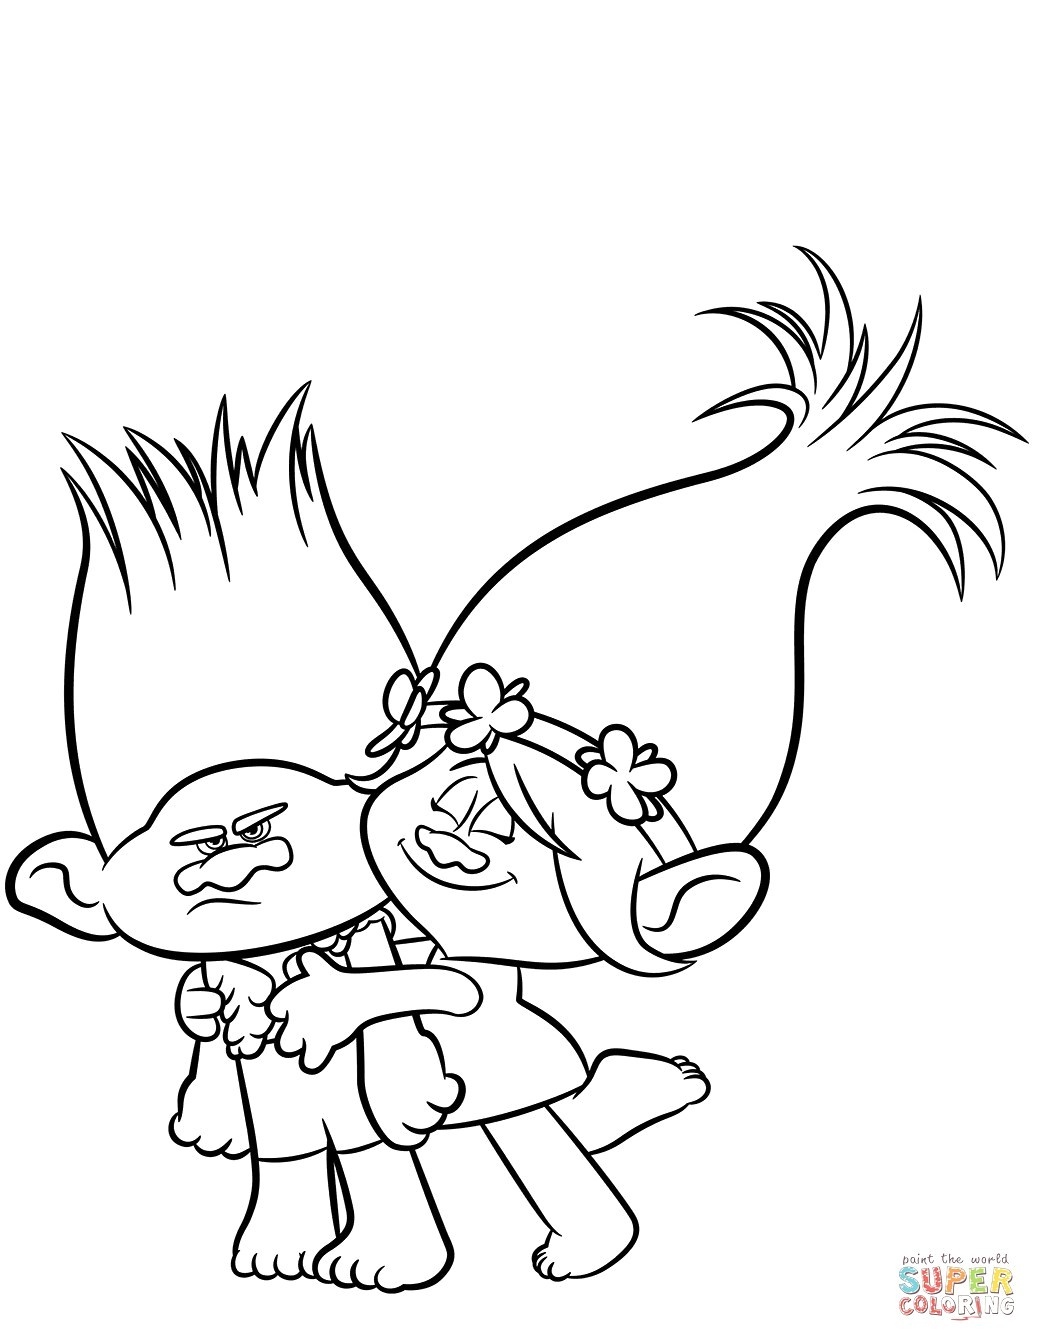 Free Trolls Coloring Pages Free Printable Troll Coloring Pages - Free Printable Troll Coloring Pages